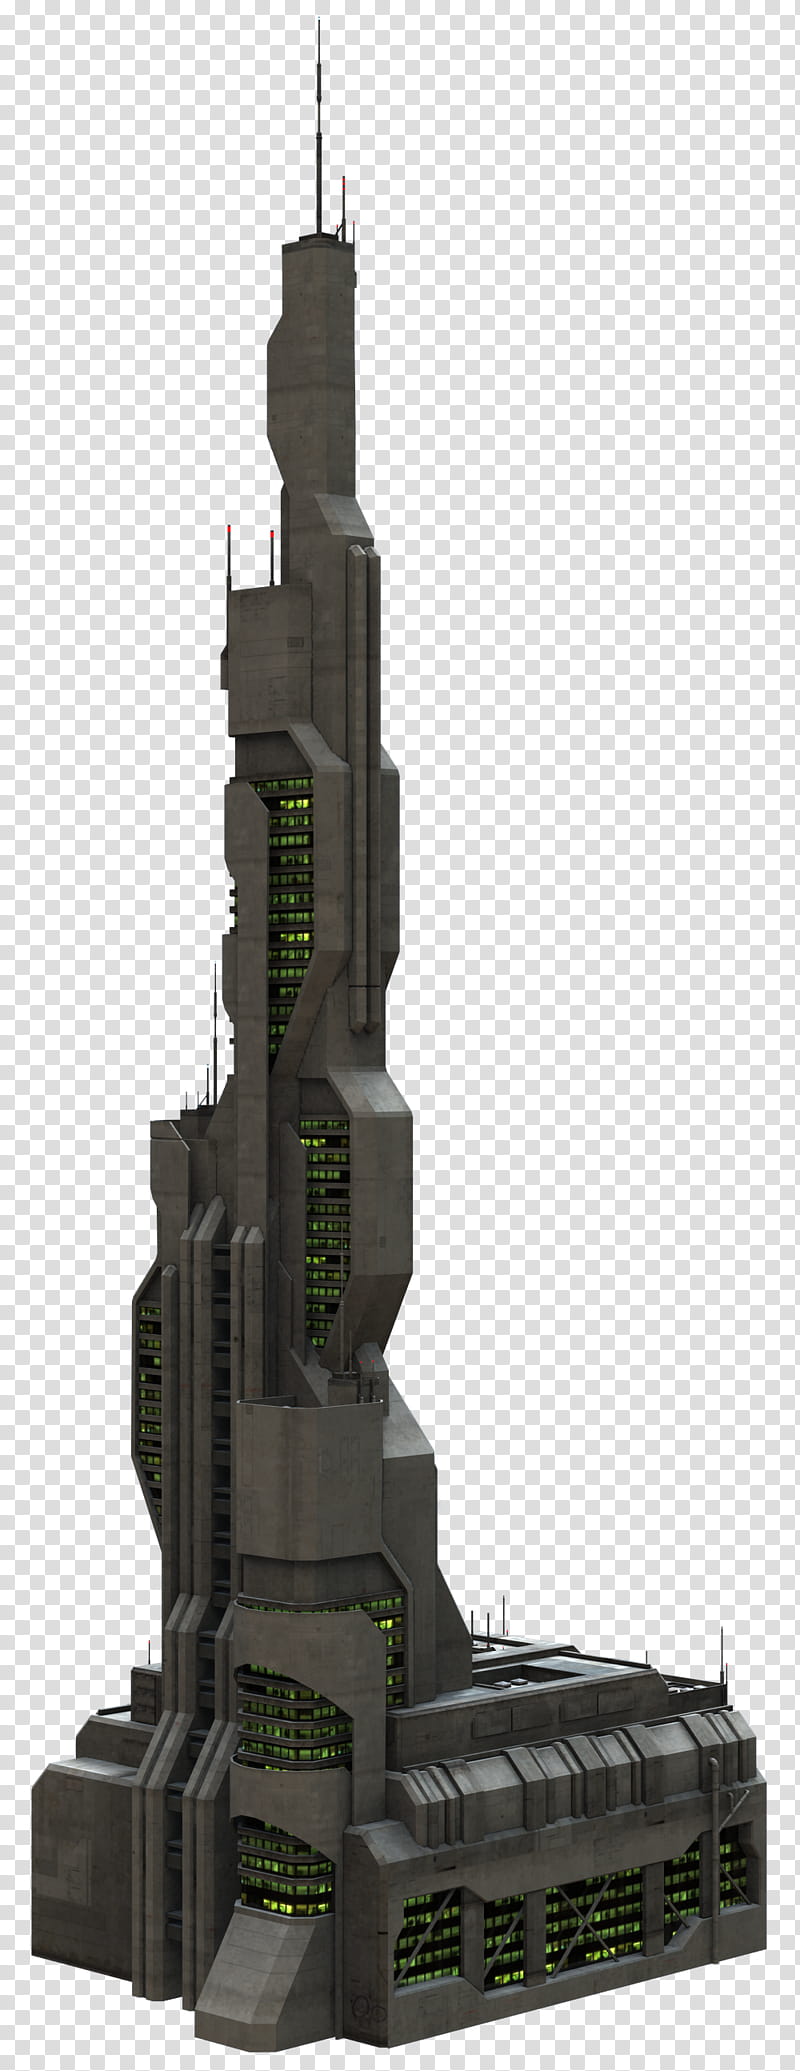 Scifi Building Series, gray tower illustration transparent background PNG clipart